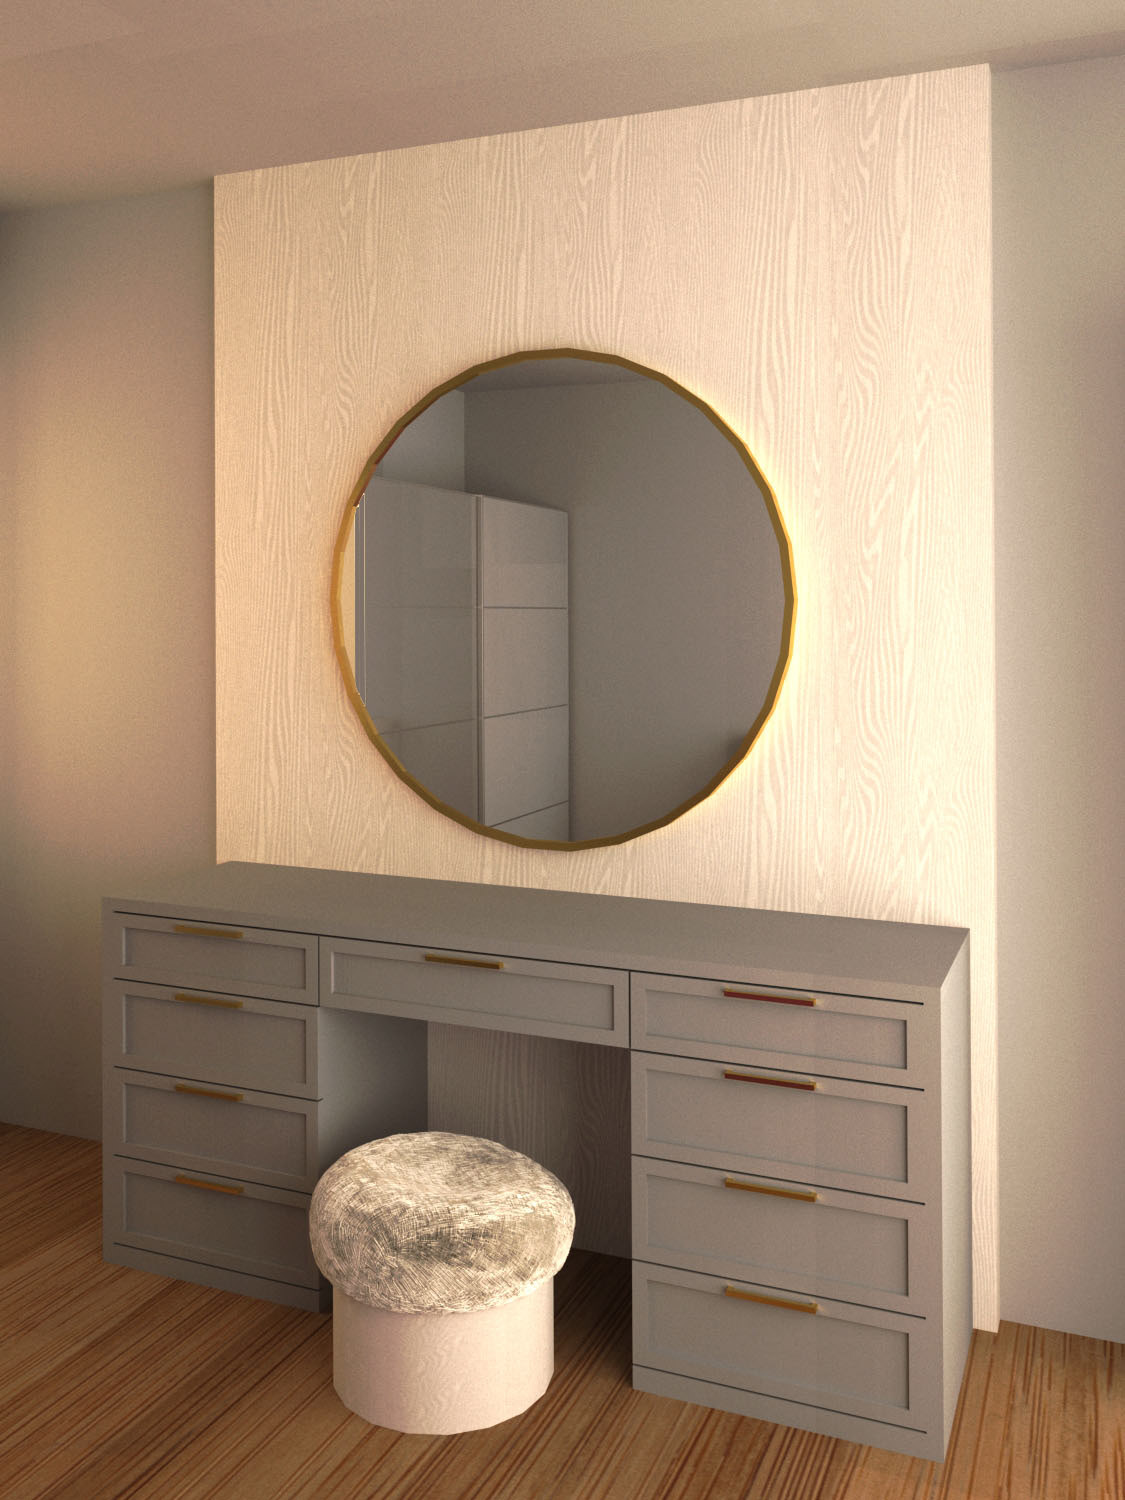 bedroom Render architecture visualization 3ds max modern vray makeuptable